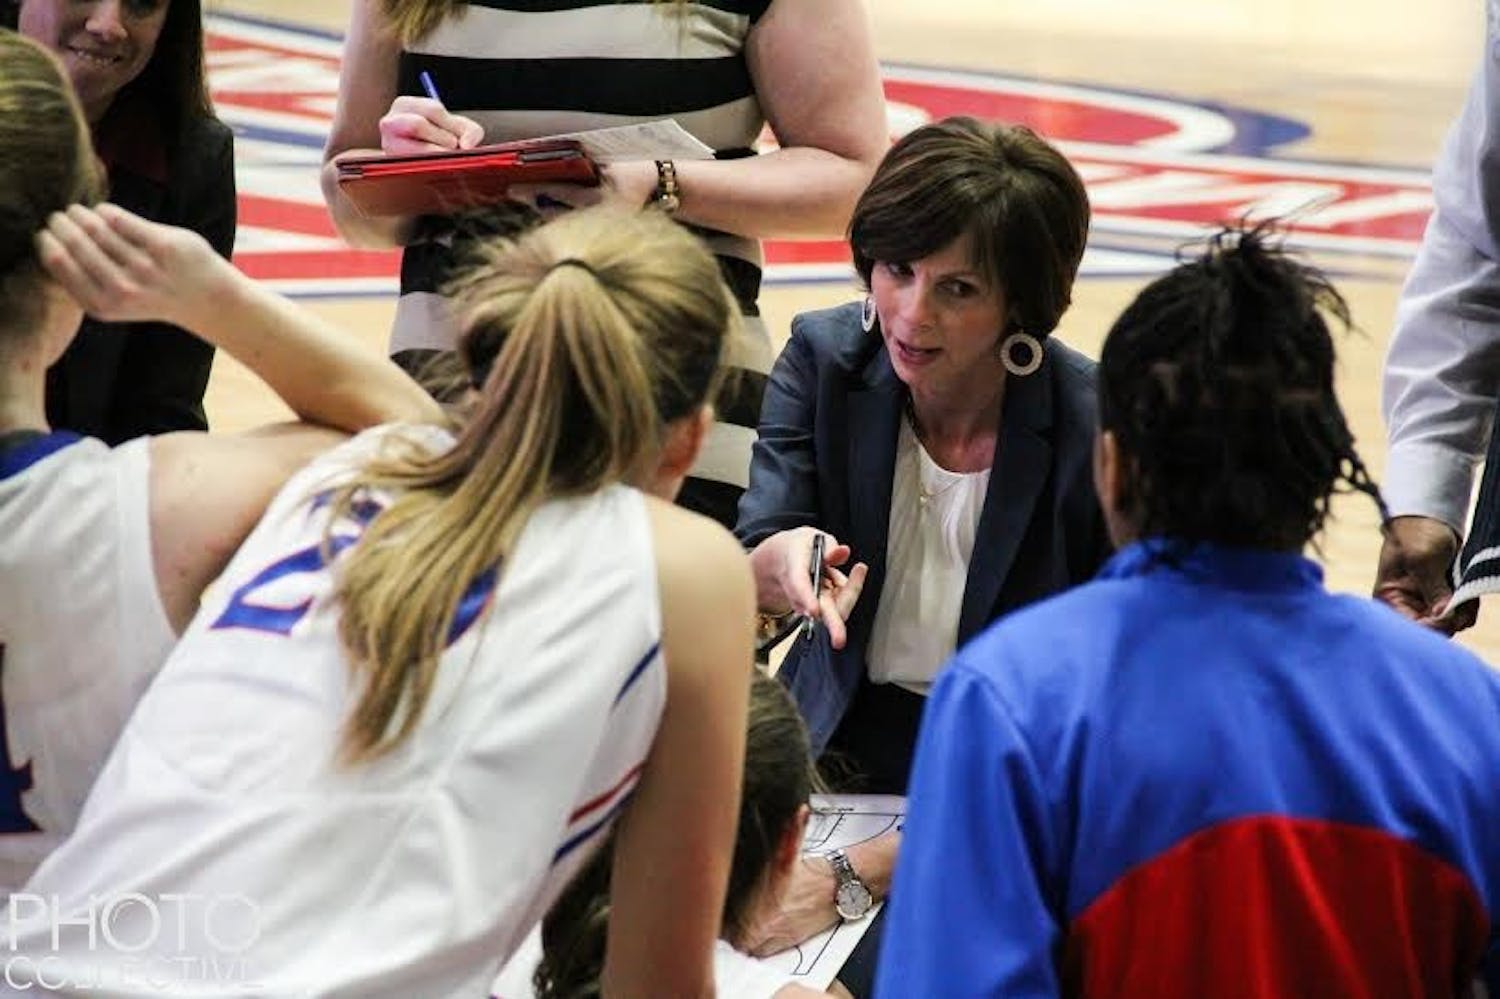 Photo Credit: Rosie Black/Photo Collective&nbsp;Head coach&nbsp;Megan Gebbia discusses game strategy&nbsp;with her team during a game last season. The Eagles will look to defend their conference title this year.&nbsp;